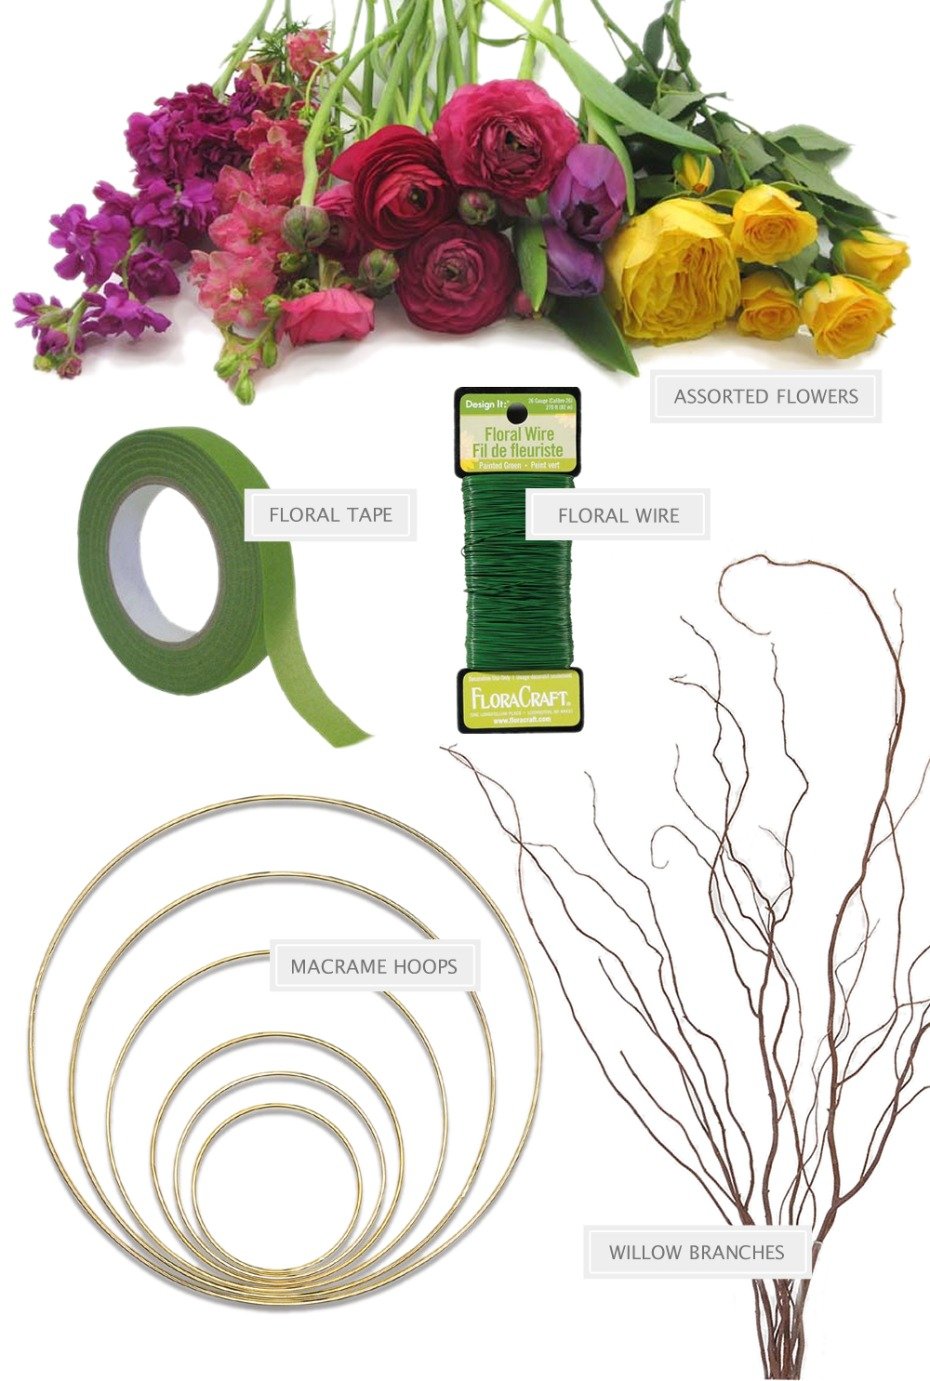 How to build your own hoop bouquet